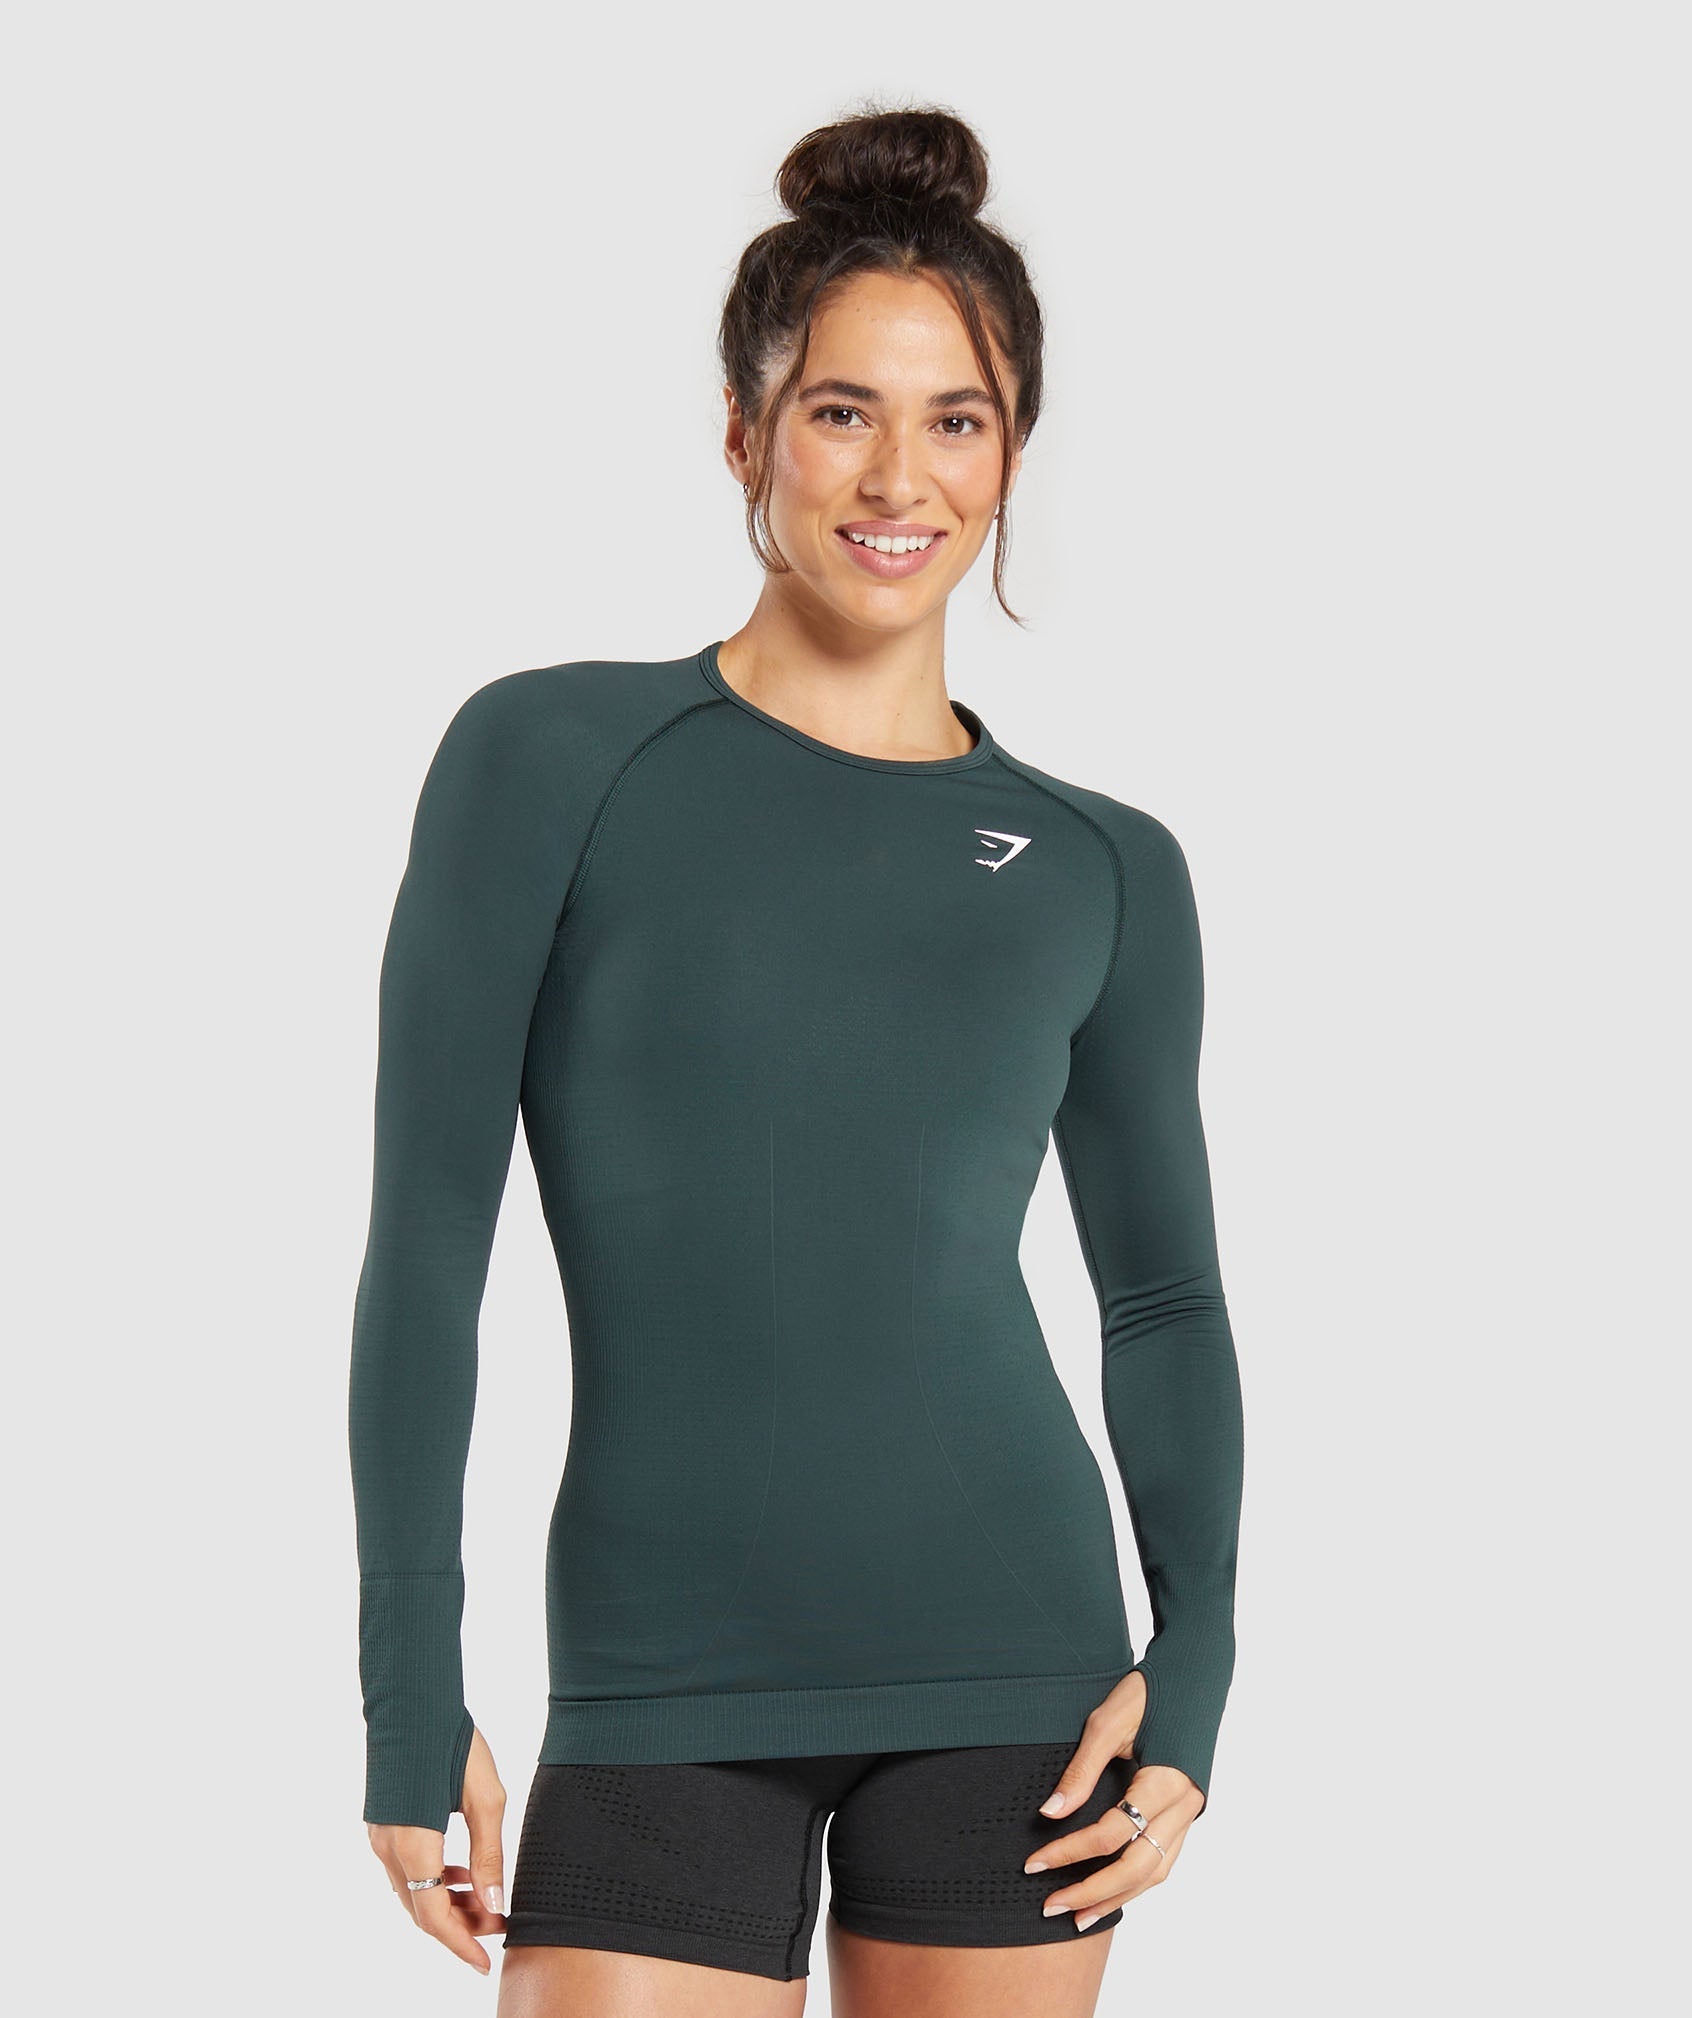 Vital Seamless 2.0 Long Sleeve Top in {{variantColor} is out of stock